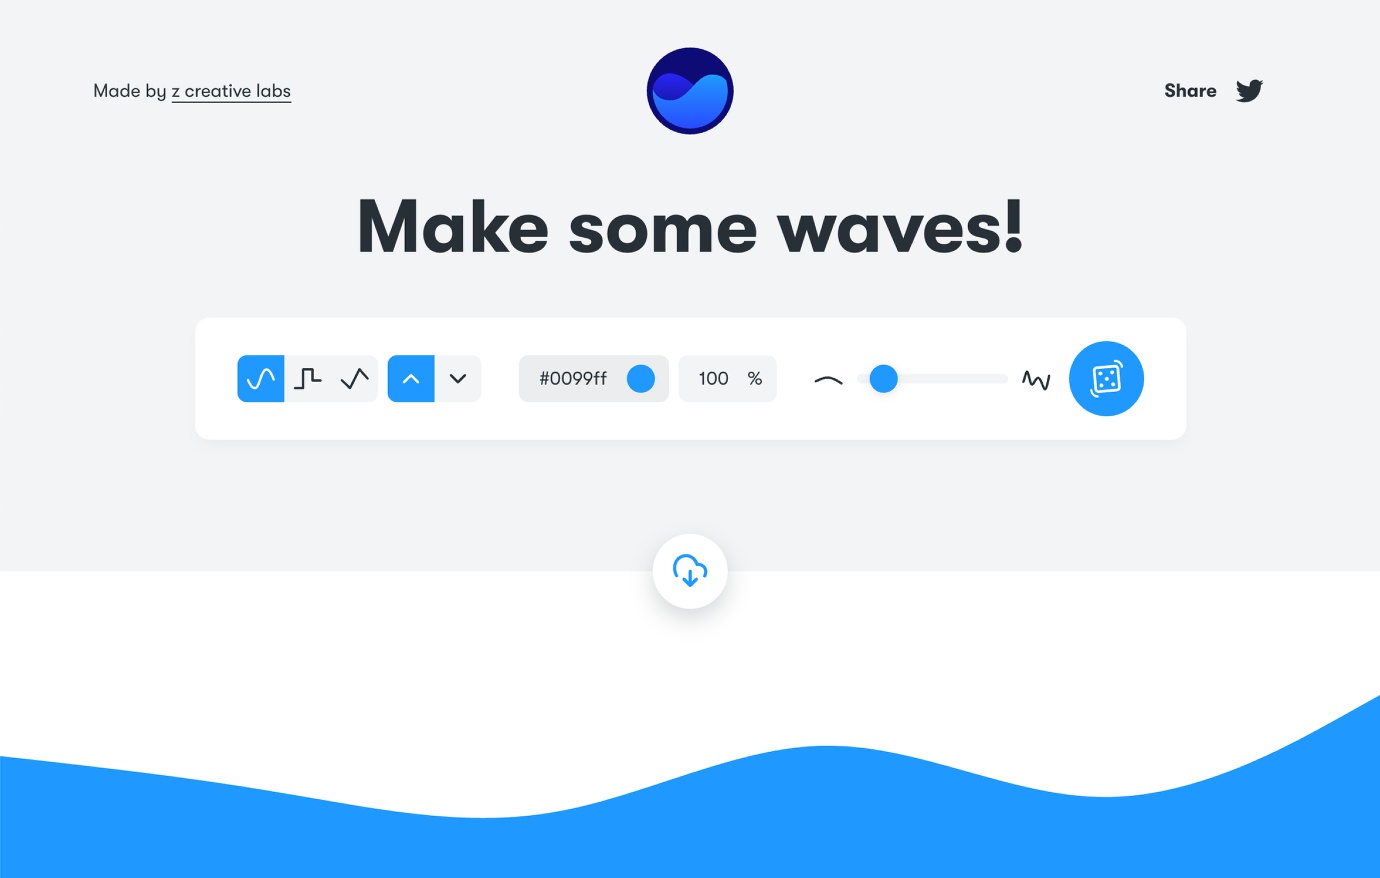 The getwaves.io home page